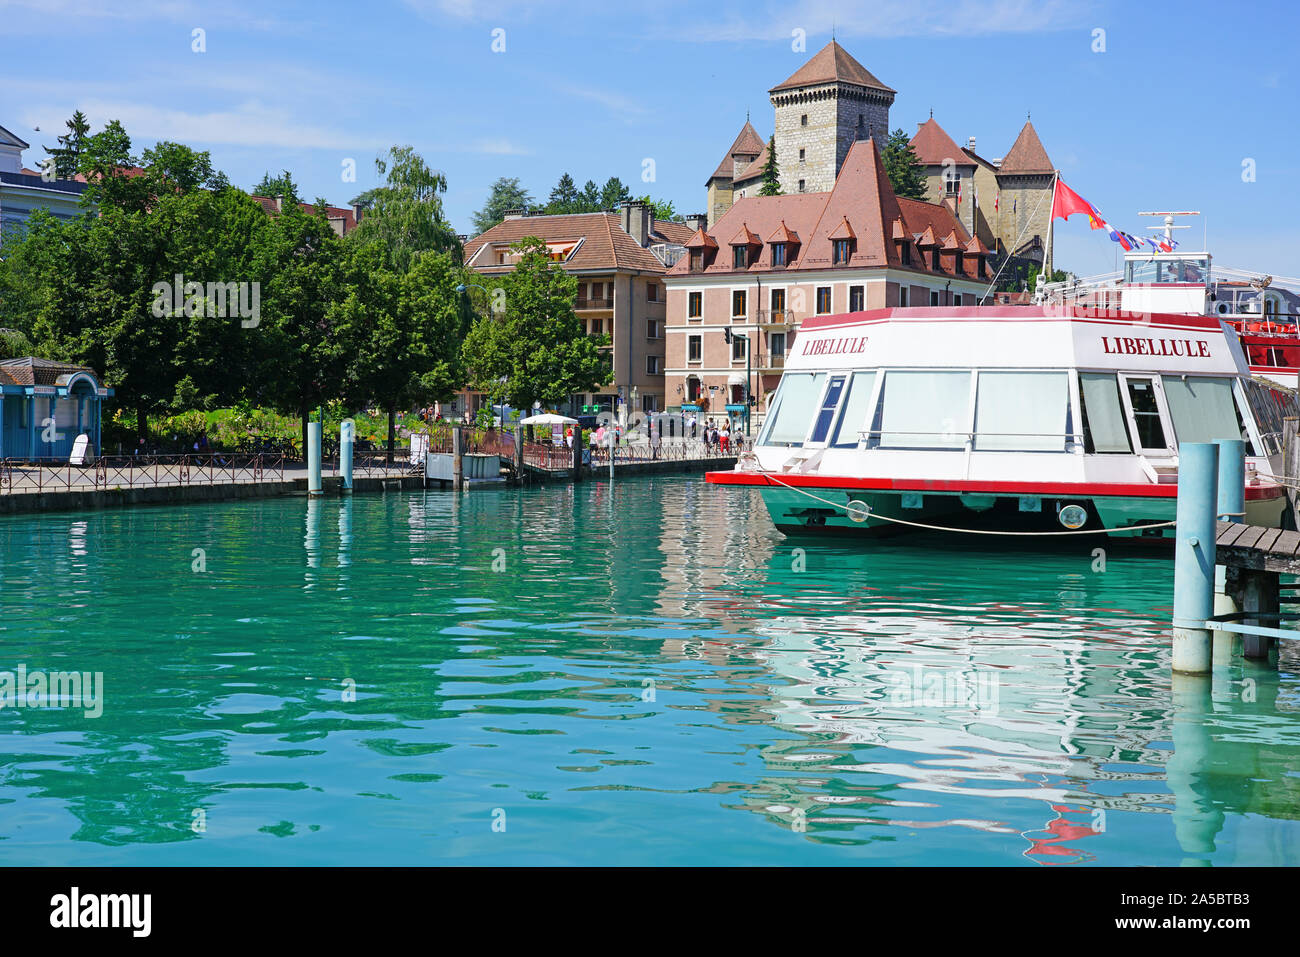 ANNECY, FRANCE -24 JUN 2019- View of the Libellule boat on the lake in the Old Town in Annecy, Haute Savoie, France. Stock Photo